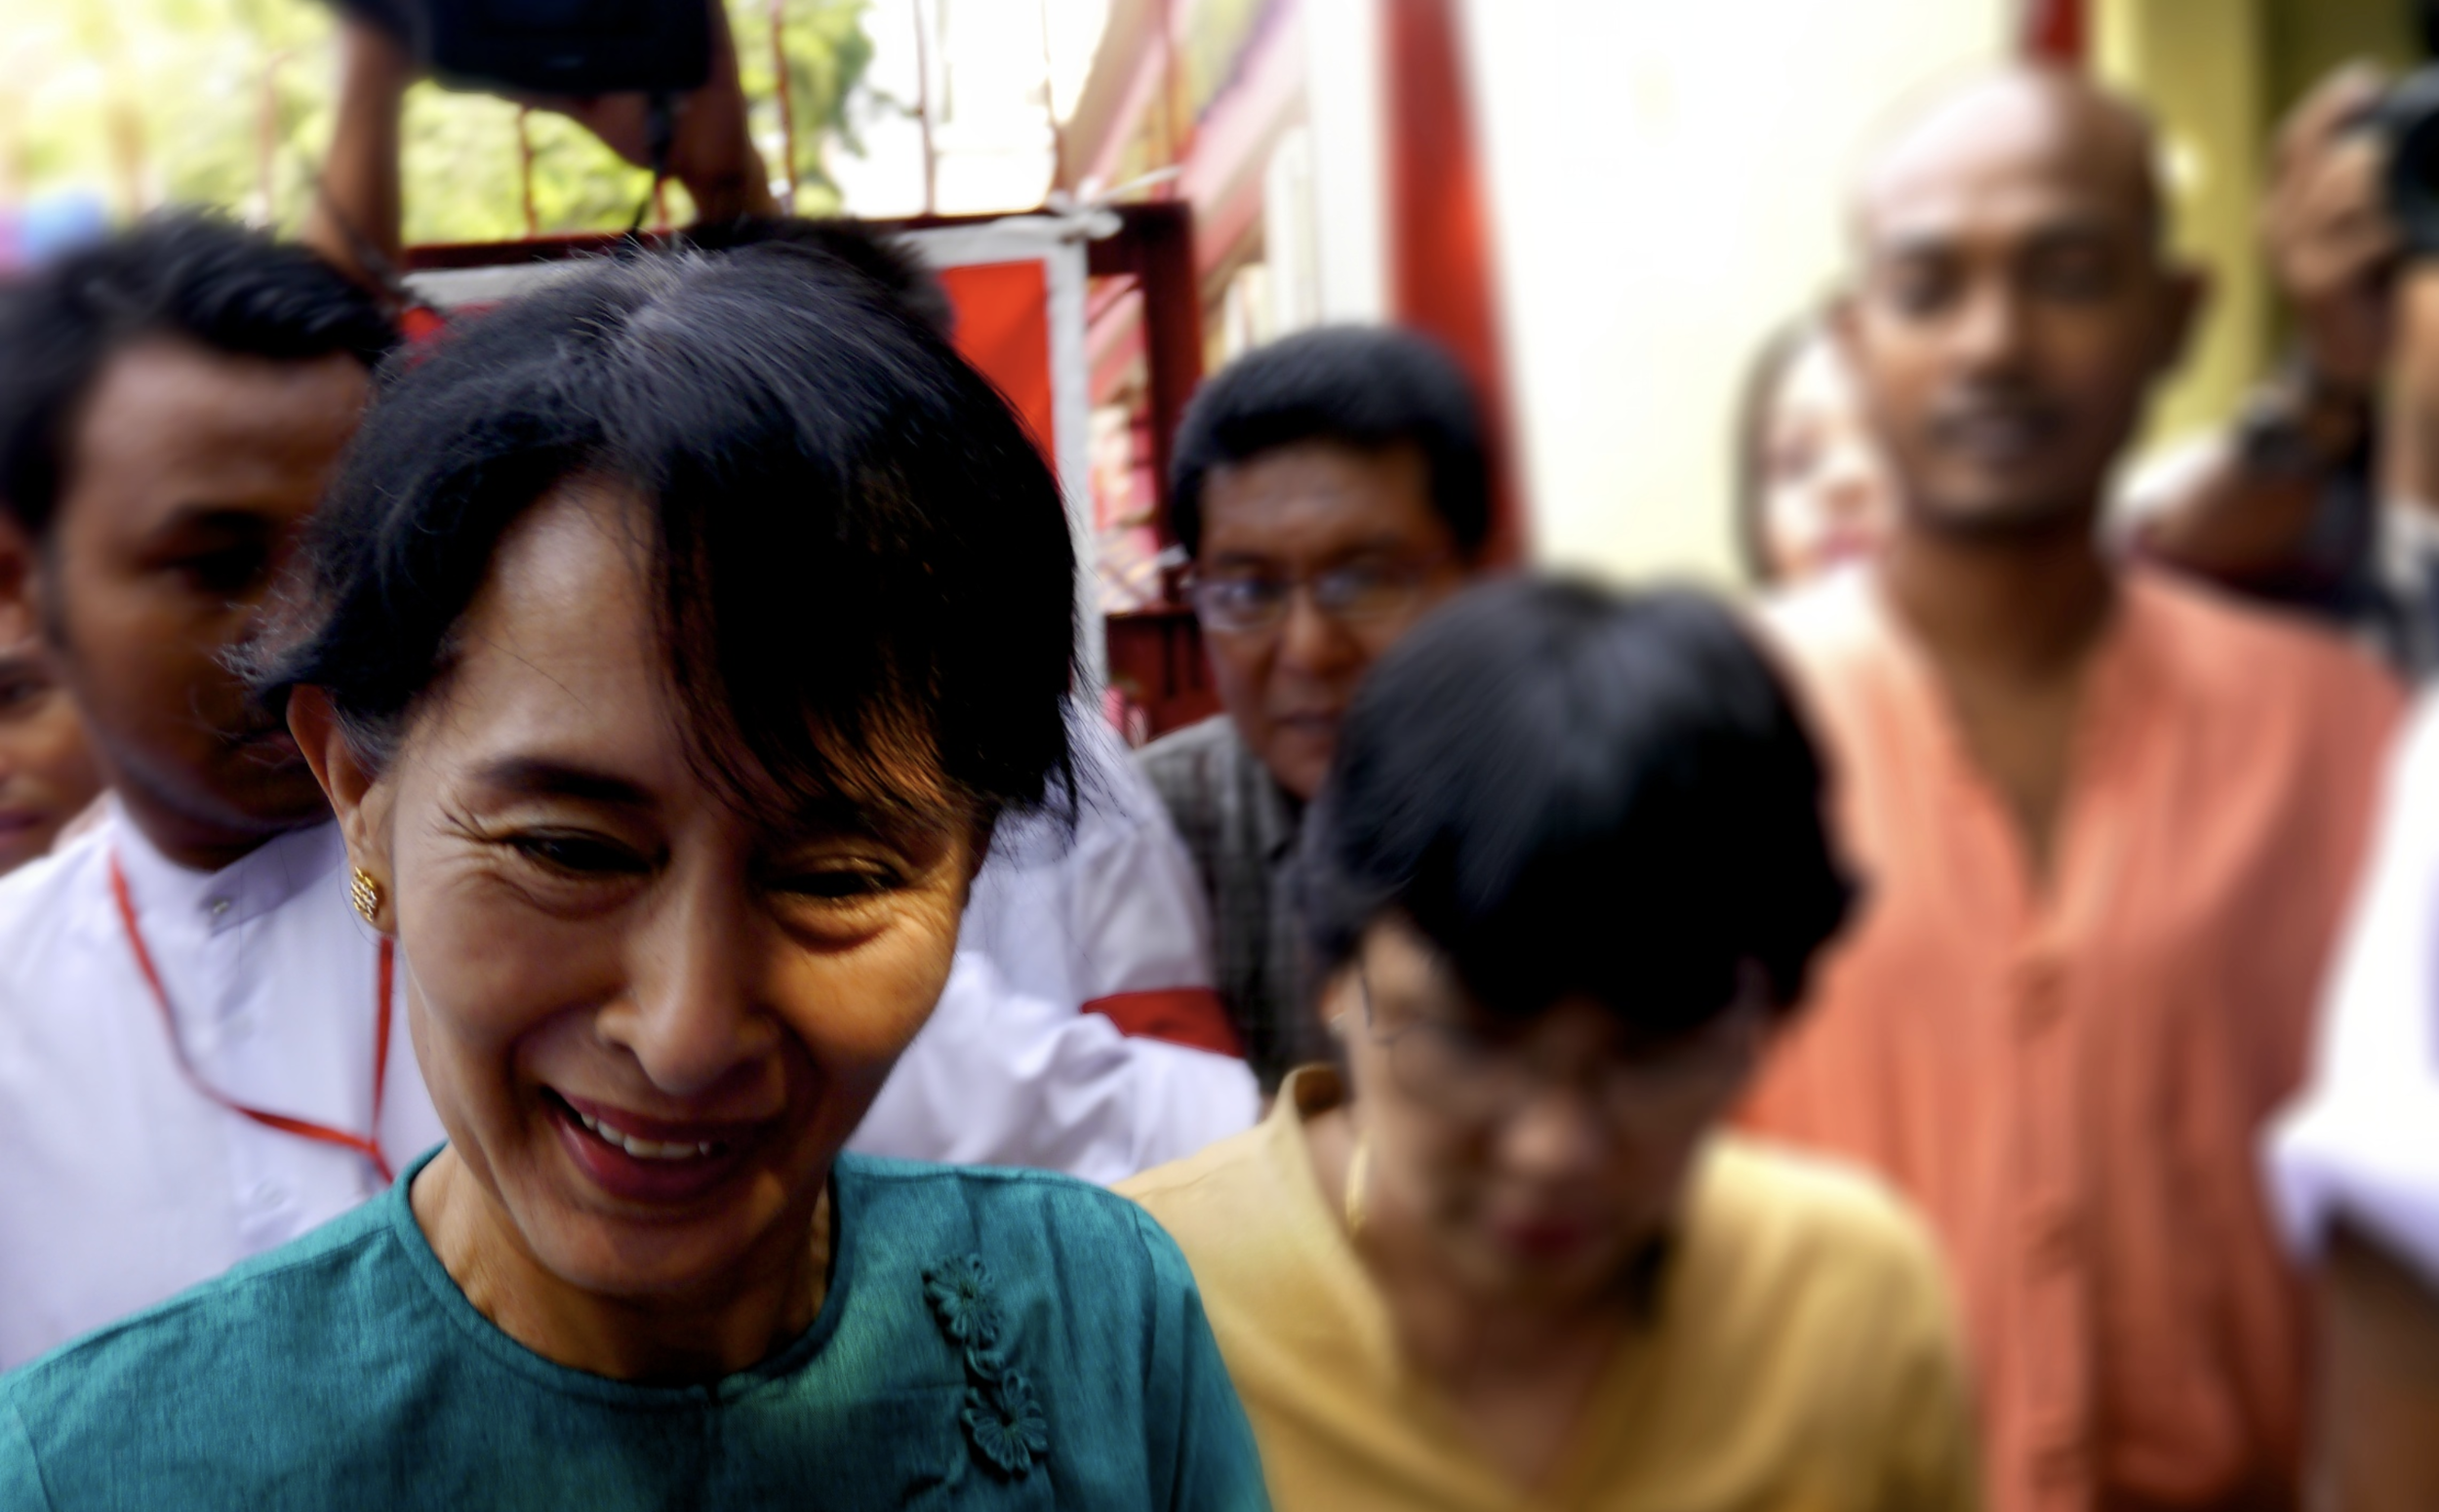  Once released, Suu Kyi did not waste any time, committing herself to a punishing schedule of campaigning with her party members in the run-up to the historic elections of April 2012. 